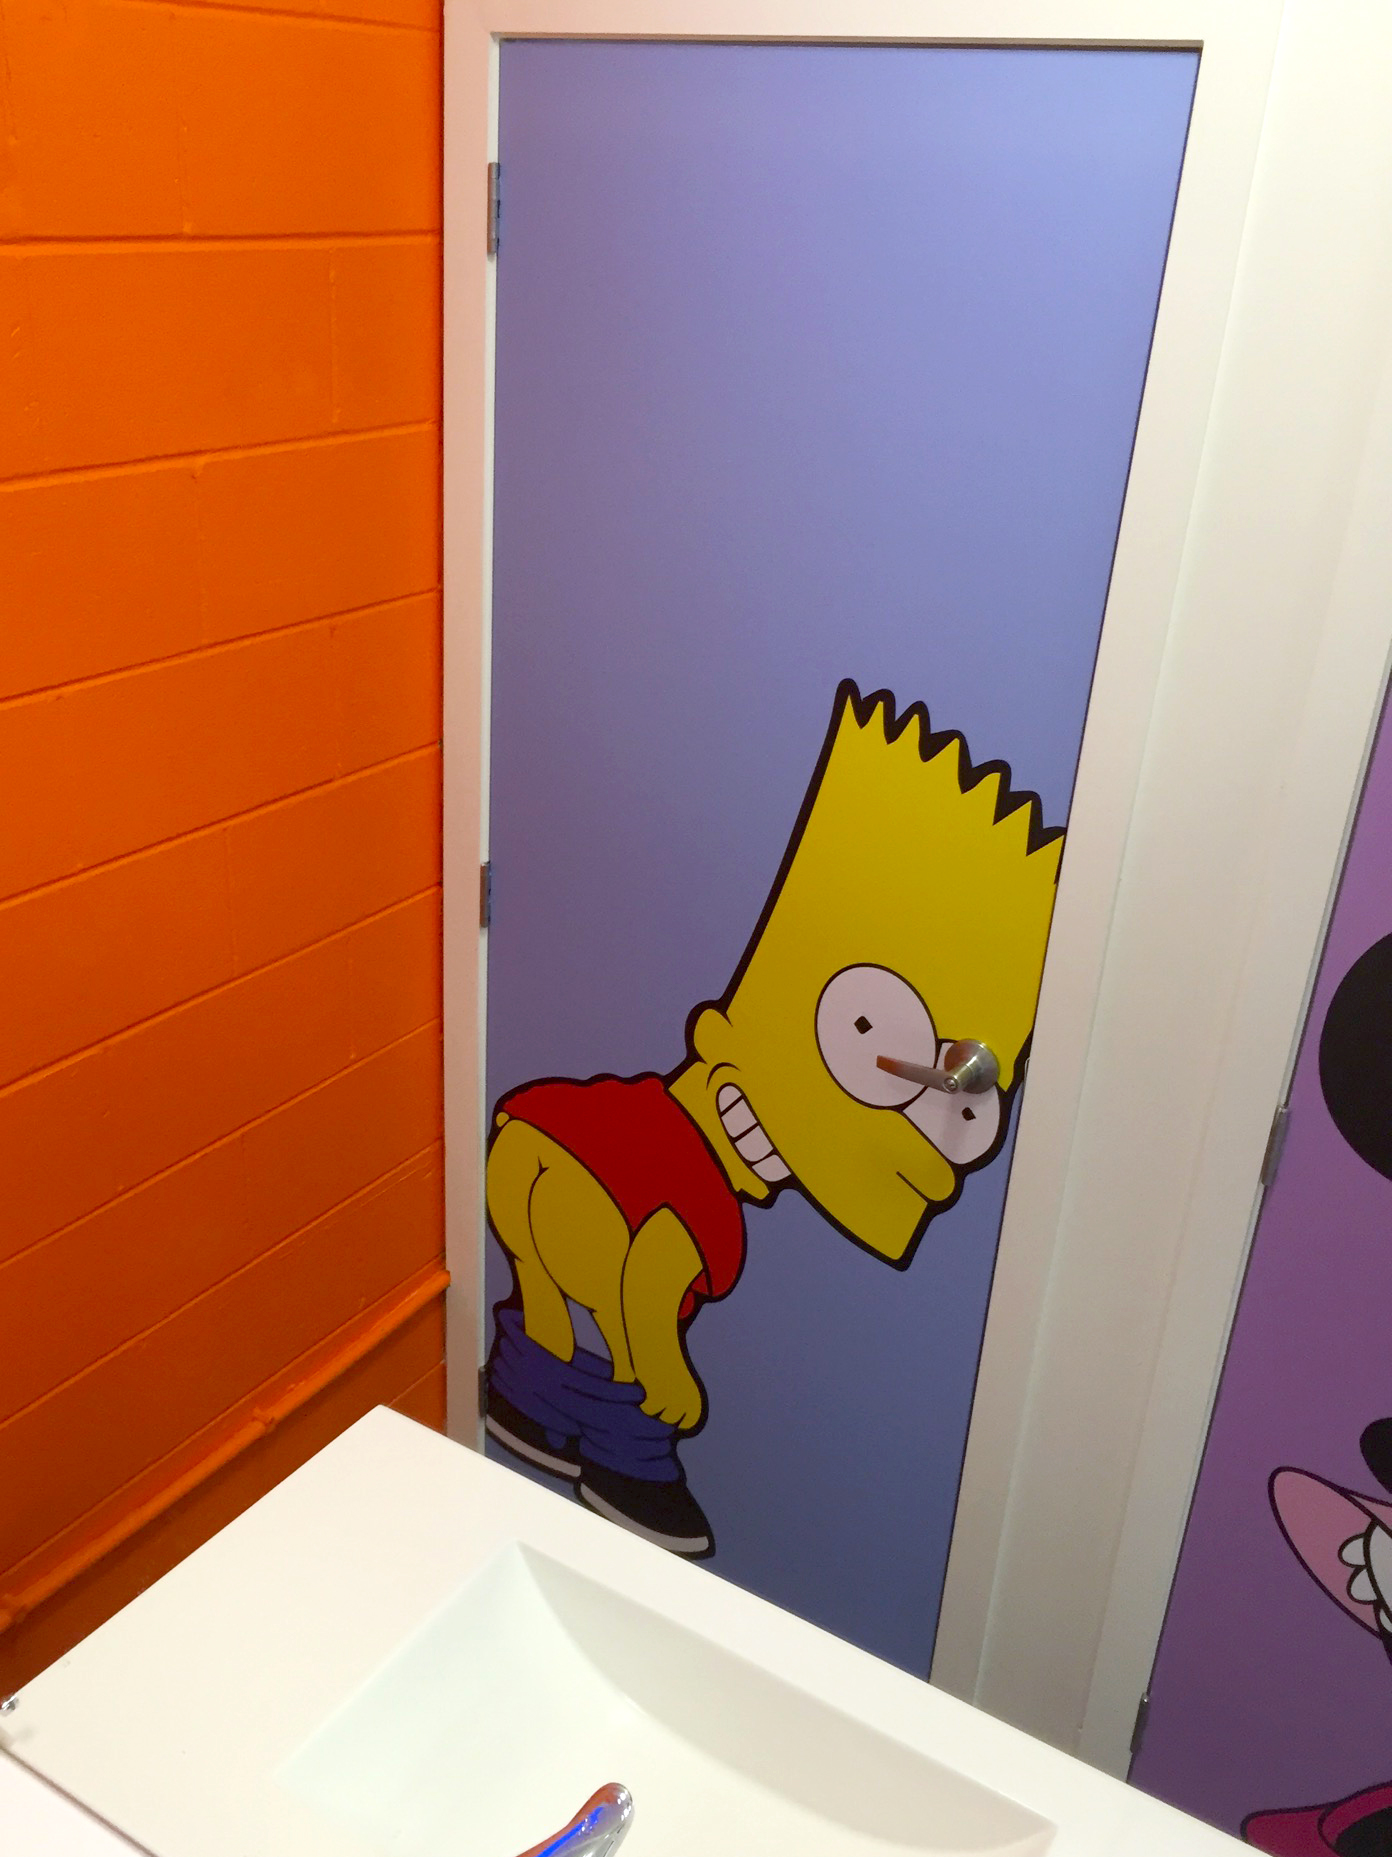 Bart Simpson used as BIG Signage toilet door indicator for males